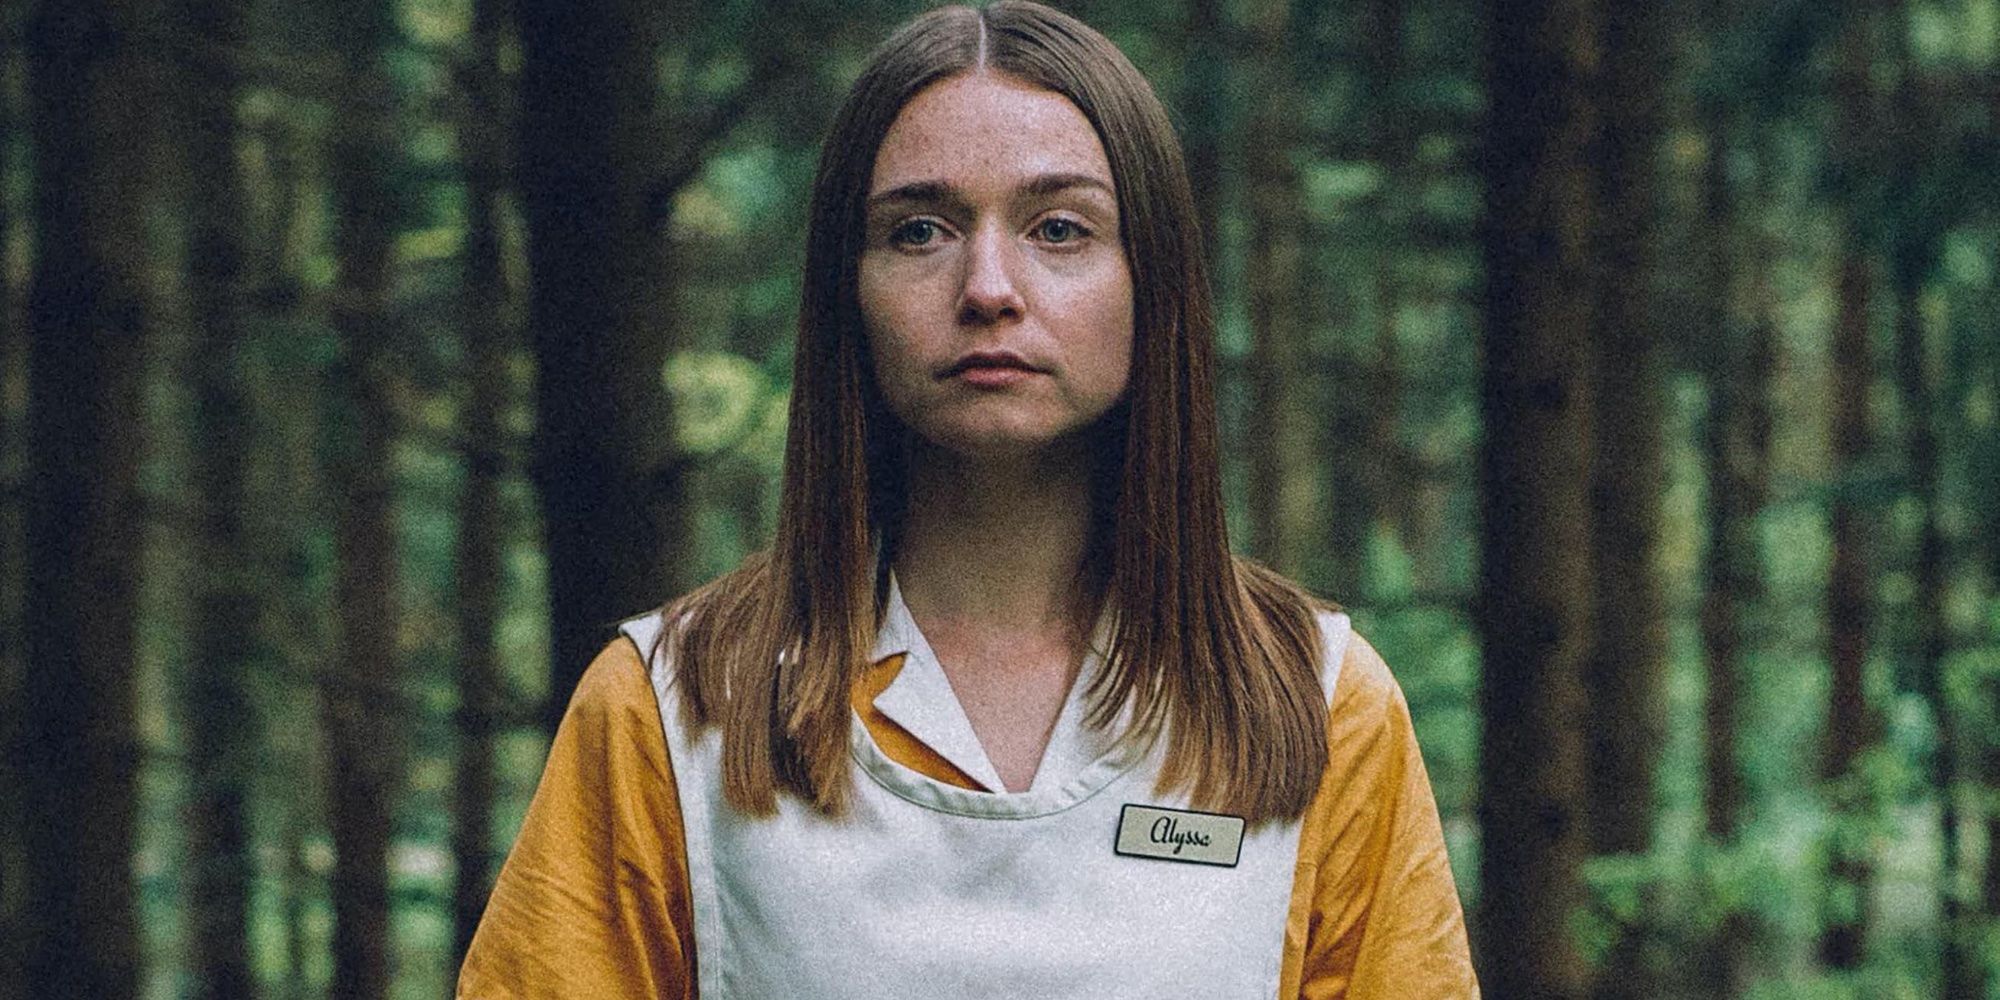 Jessica Barden as Alyssa in The End of the F***ing World Season 2